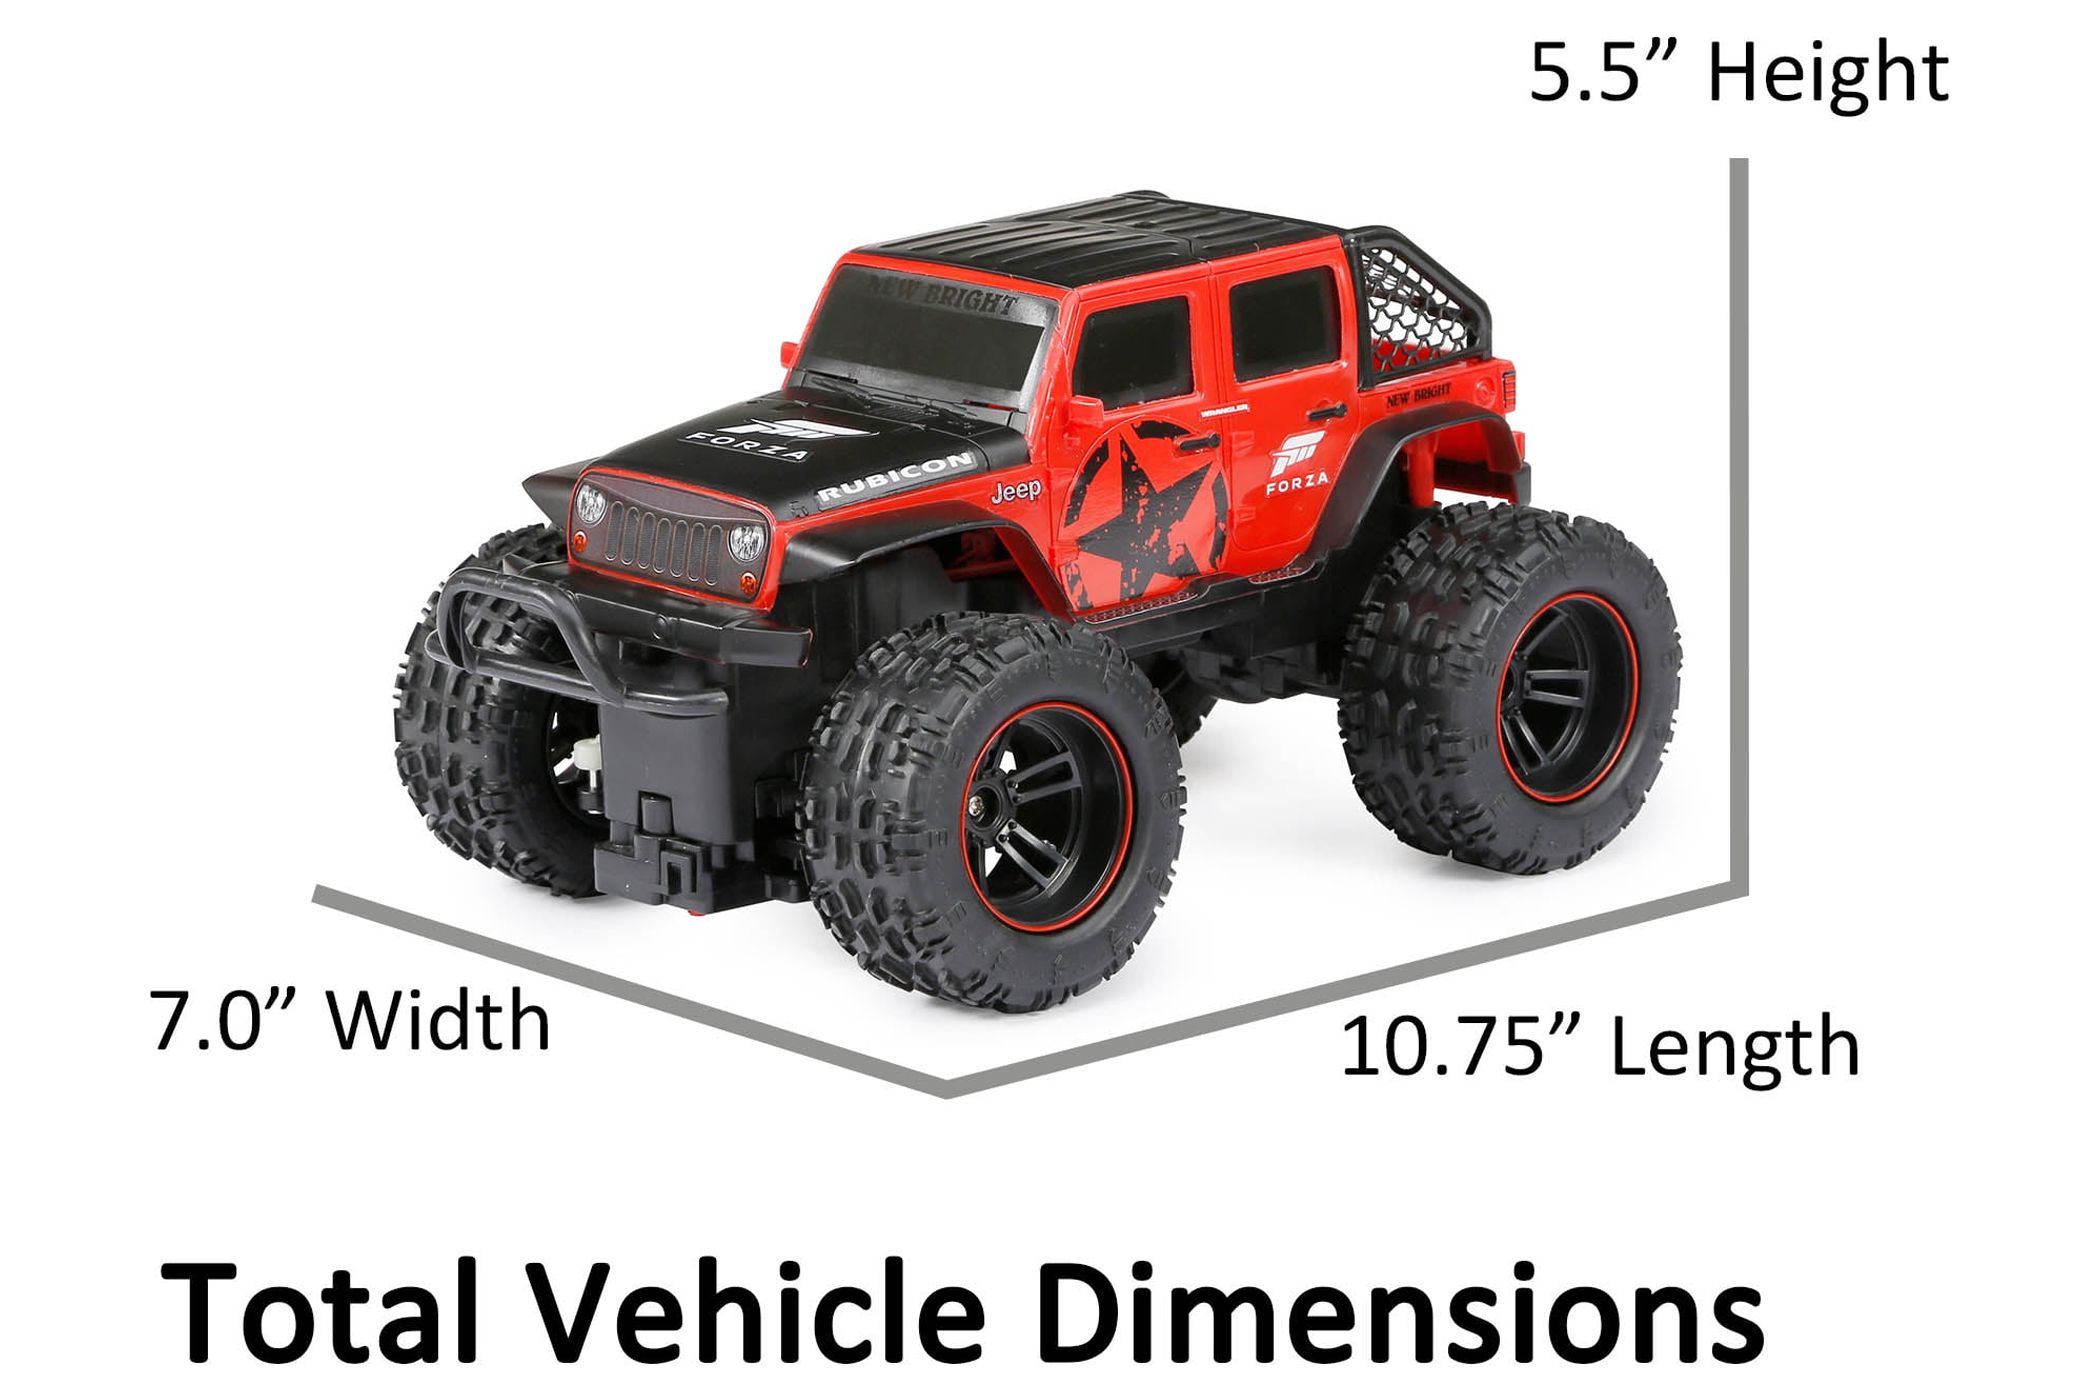 New Bright (1:16) Forza Jeep Wrangler Battery Radio Control Red/Black Truck, 1688UF-4RK - image 4 of 10